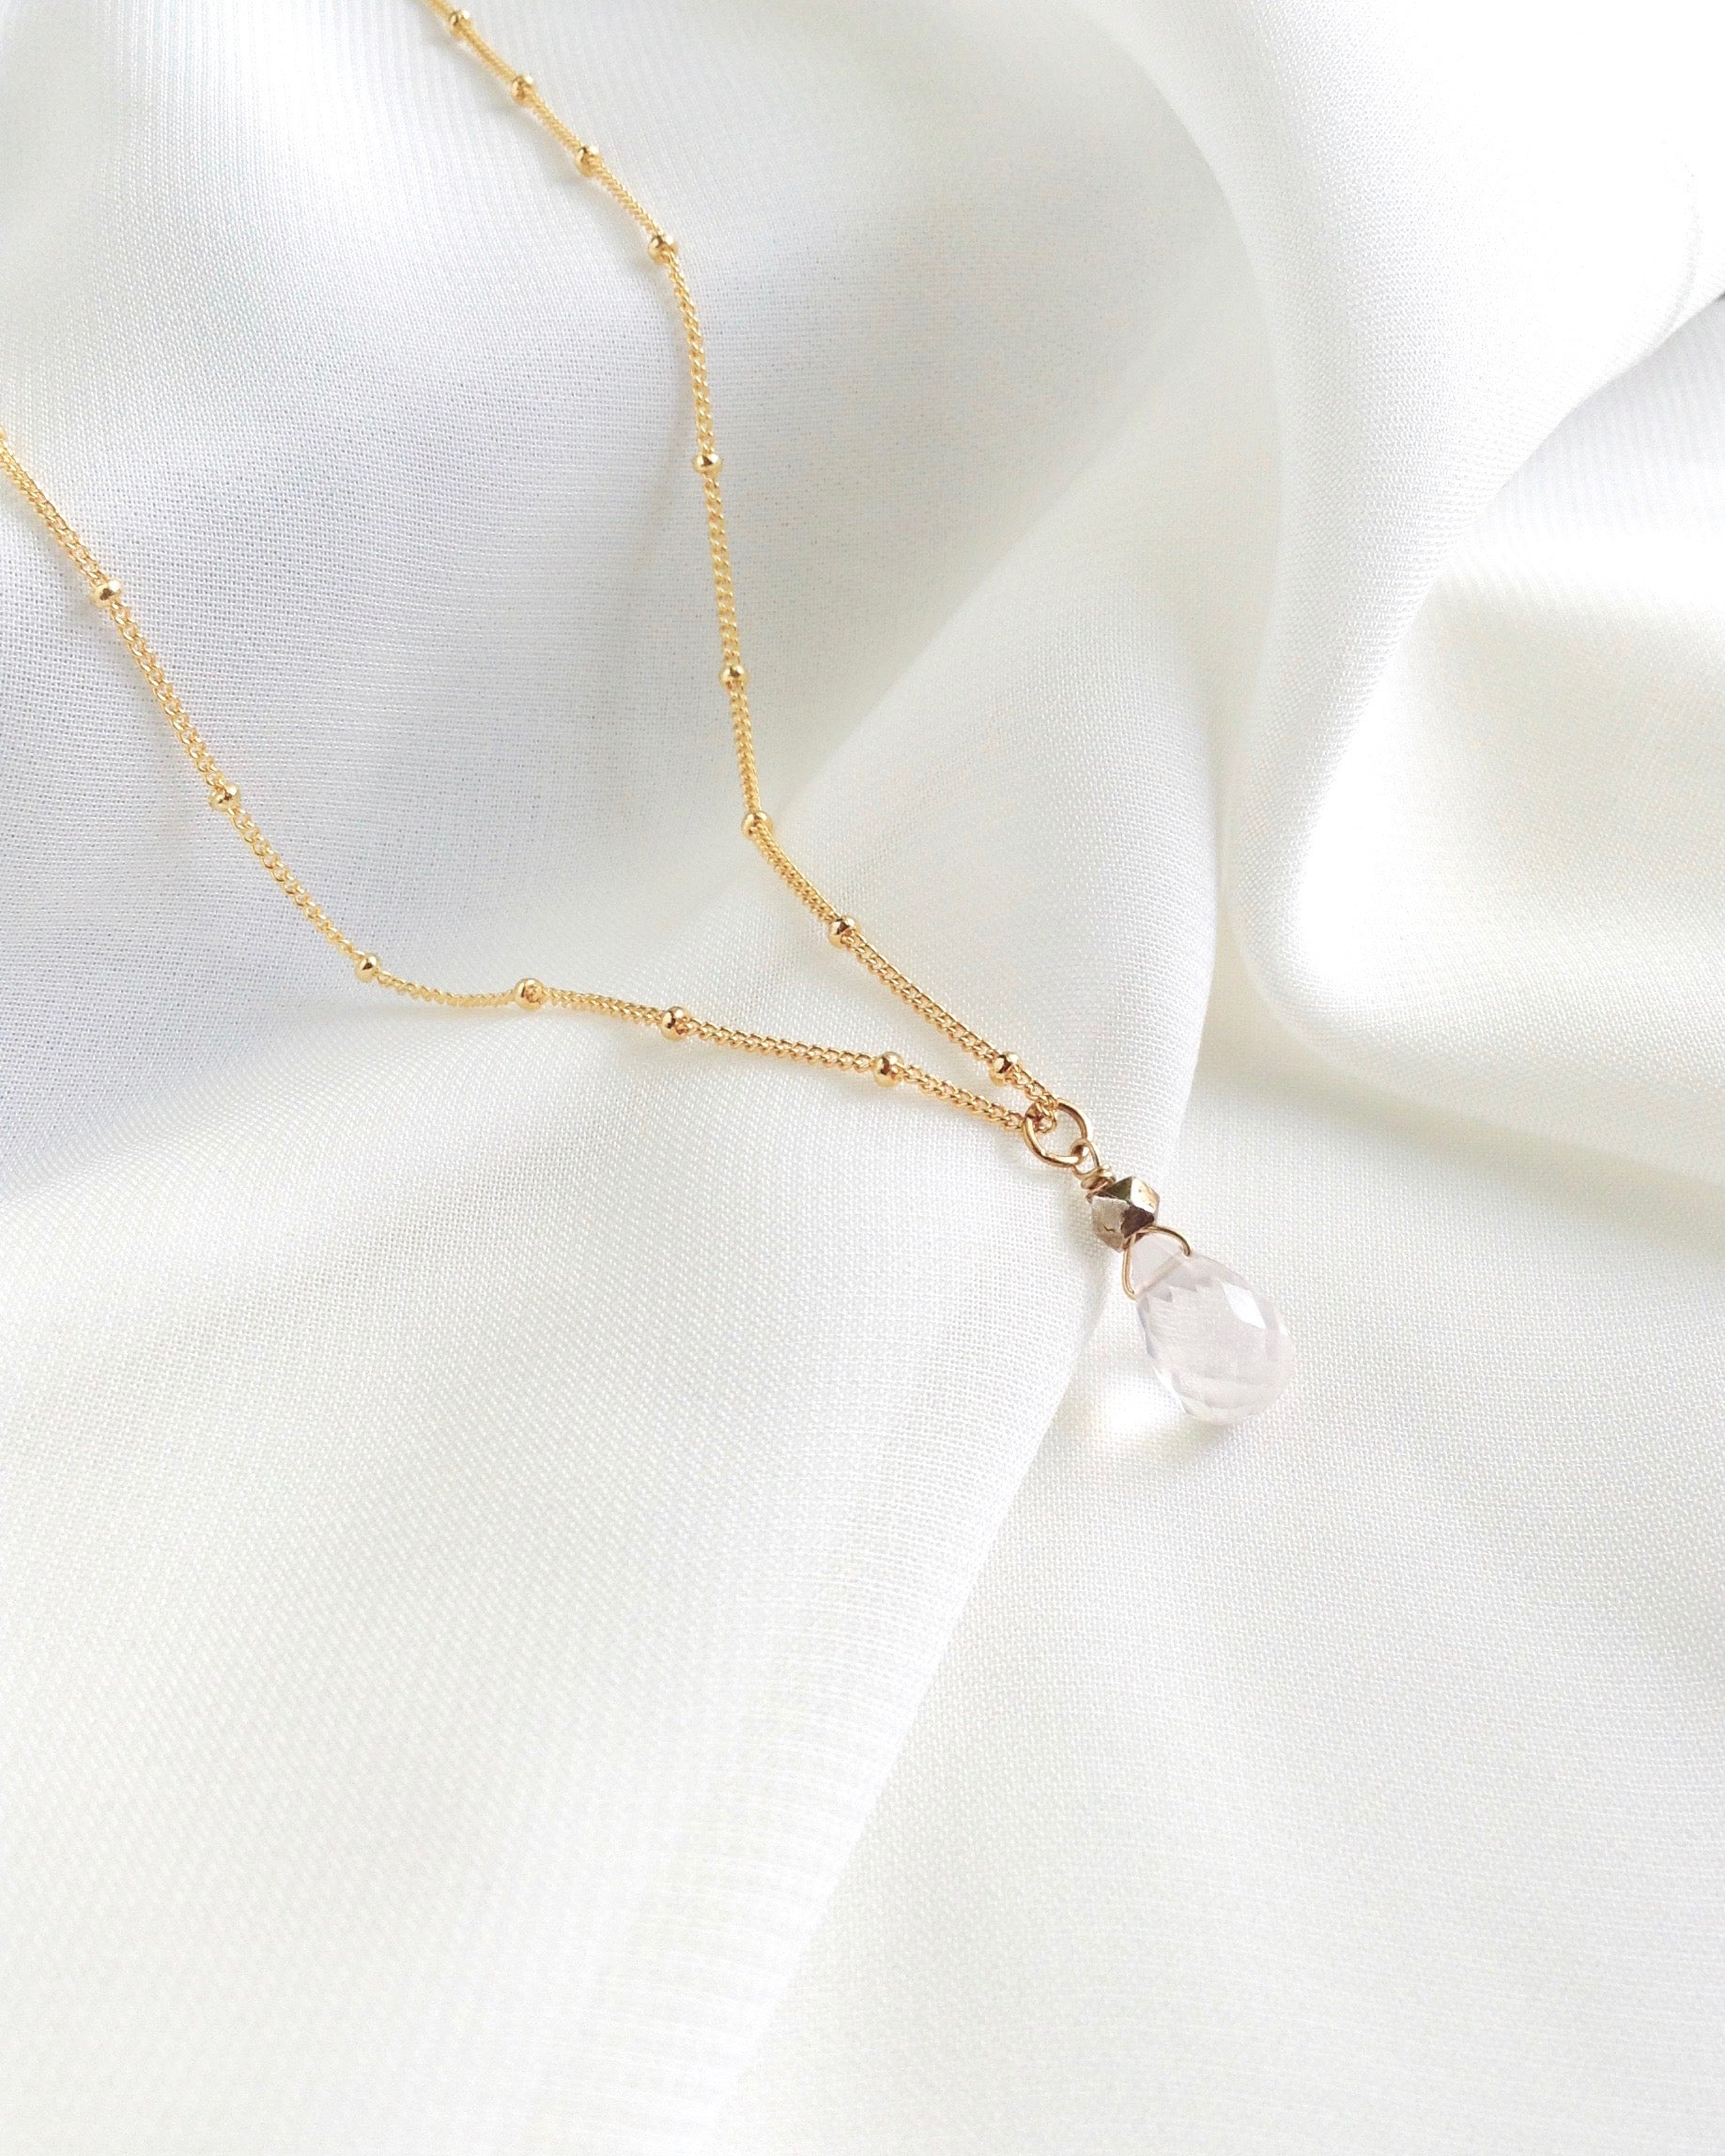 Rose Quartz Crystal Necklace in Gold Filled or Sterling Silver | IB Jewelry